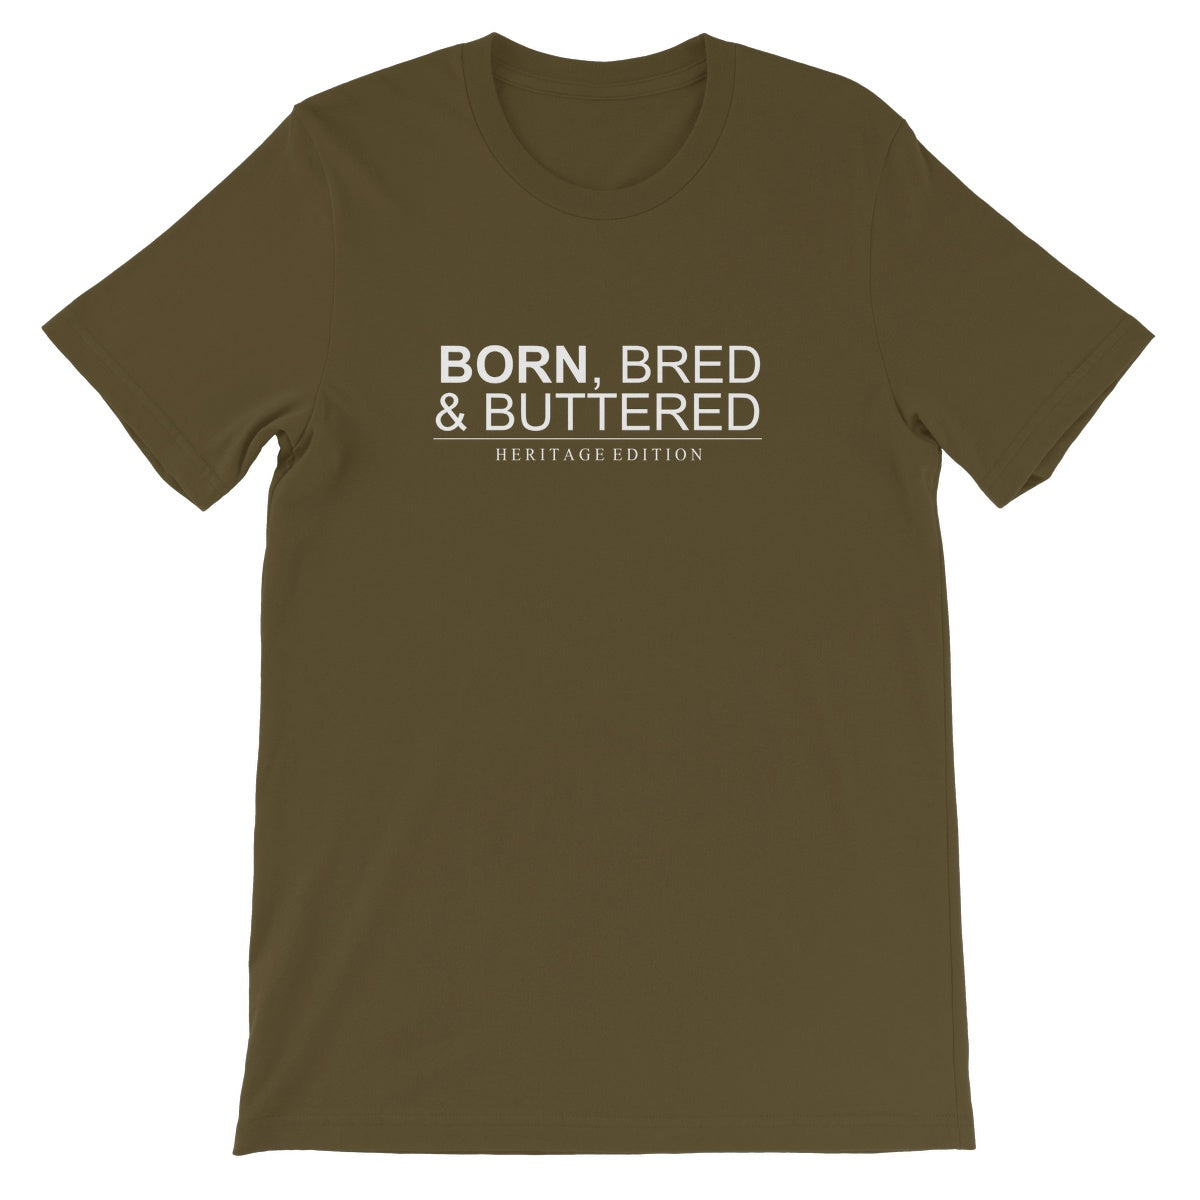 BORN, BRED & BUTTERED ICE APPAREL  Unisex Short Sleeve T-Shirt